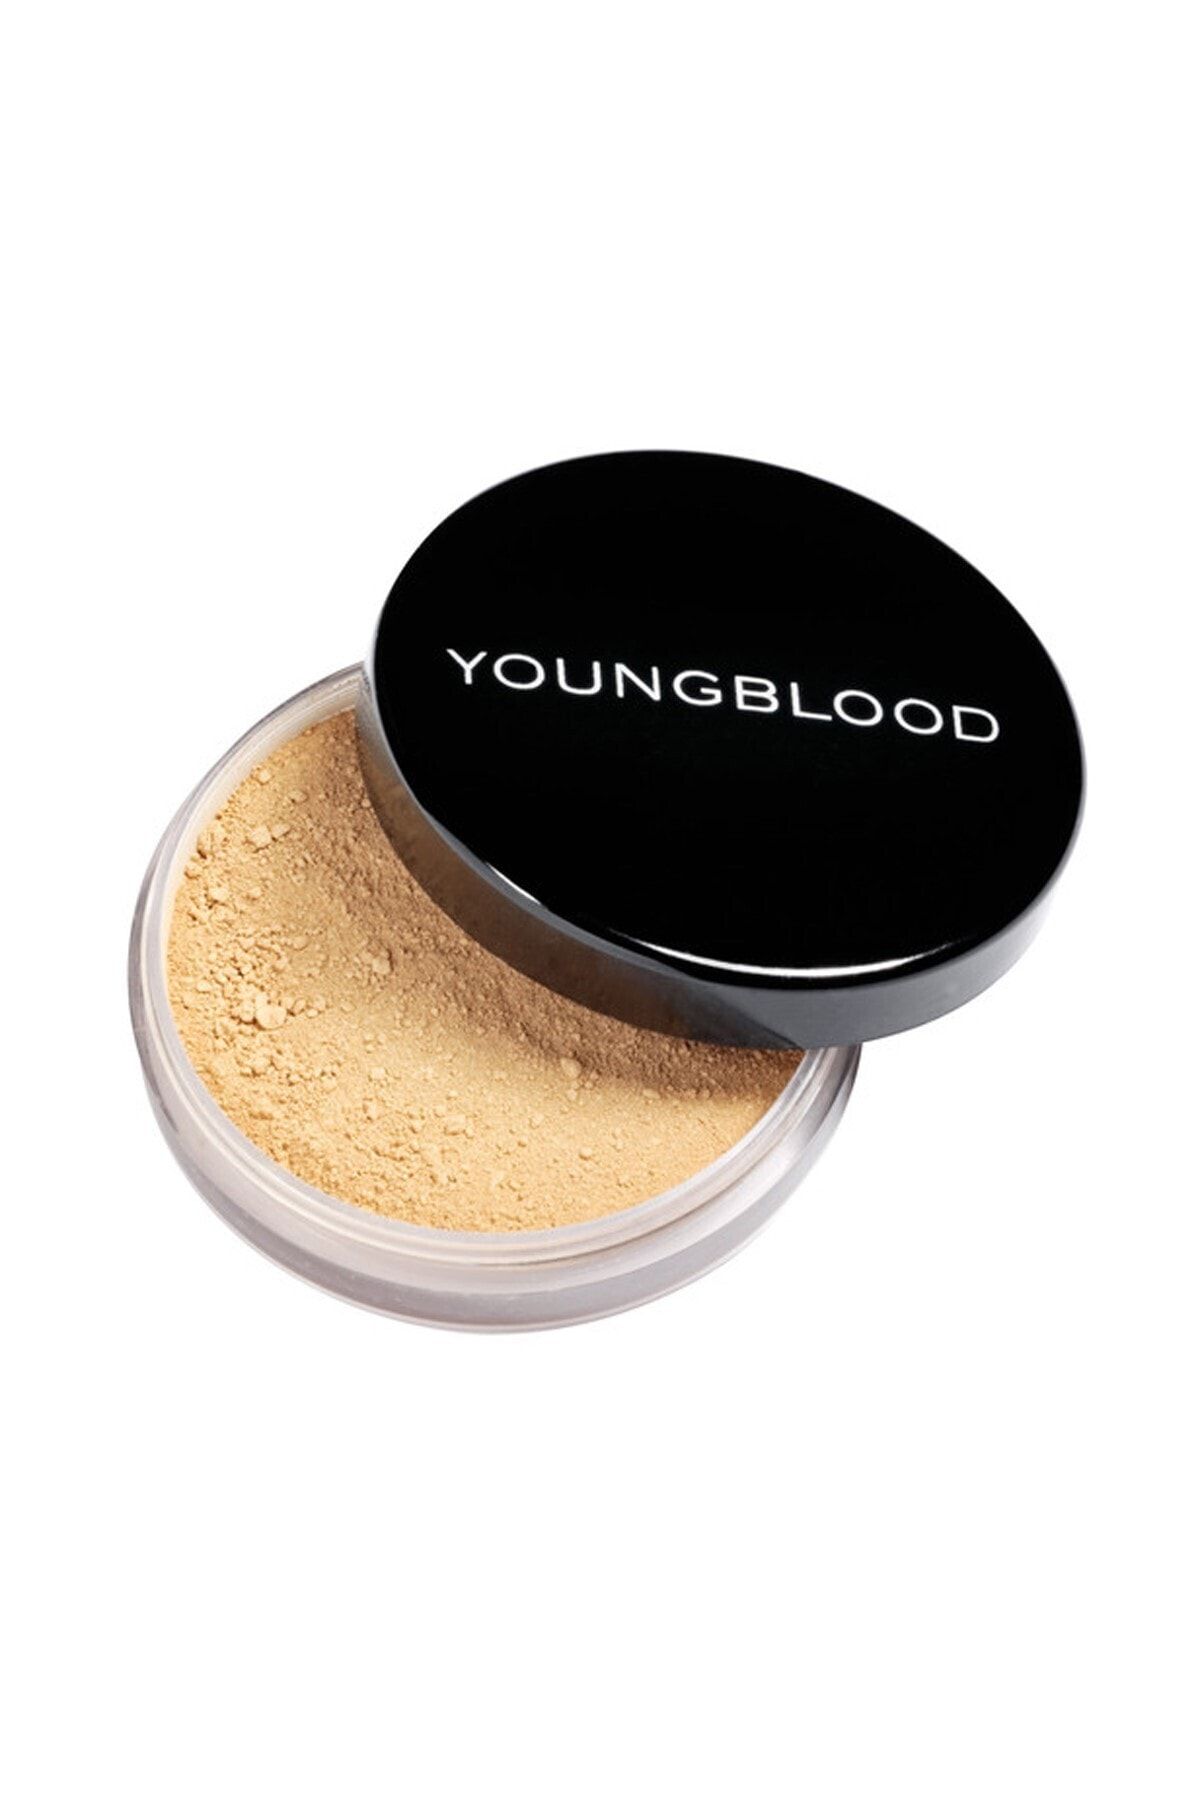 Youngblood Natural Loose Mineral Foundation - Mineral Toz Fondöten Barely Ivory 10gr 696137010038